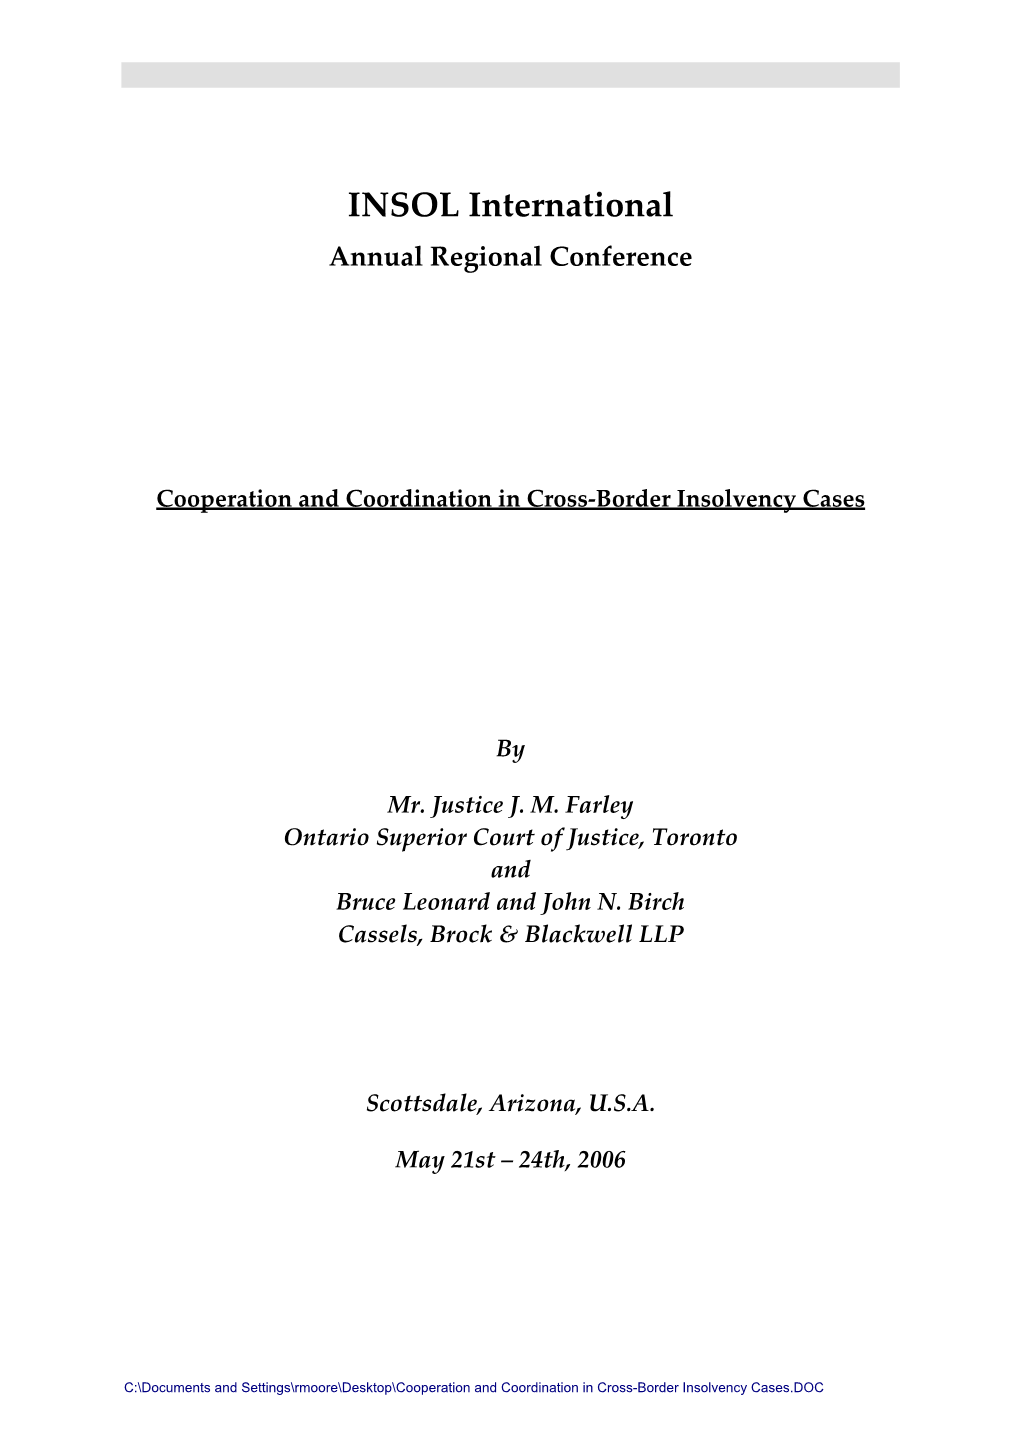 Cooperation and Coordination in Cross-Border Insolvency Cases.DOC